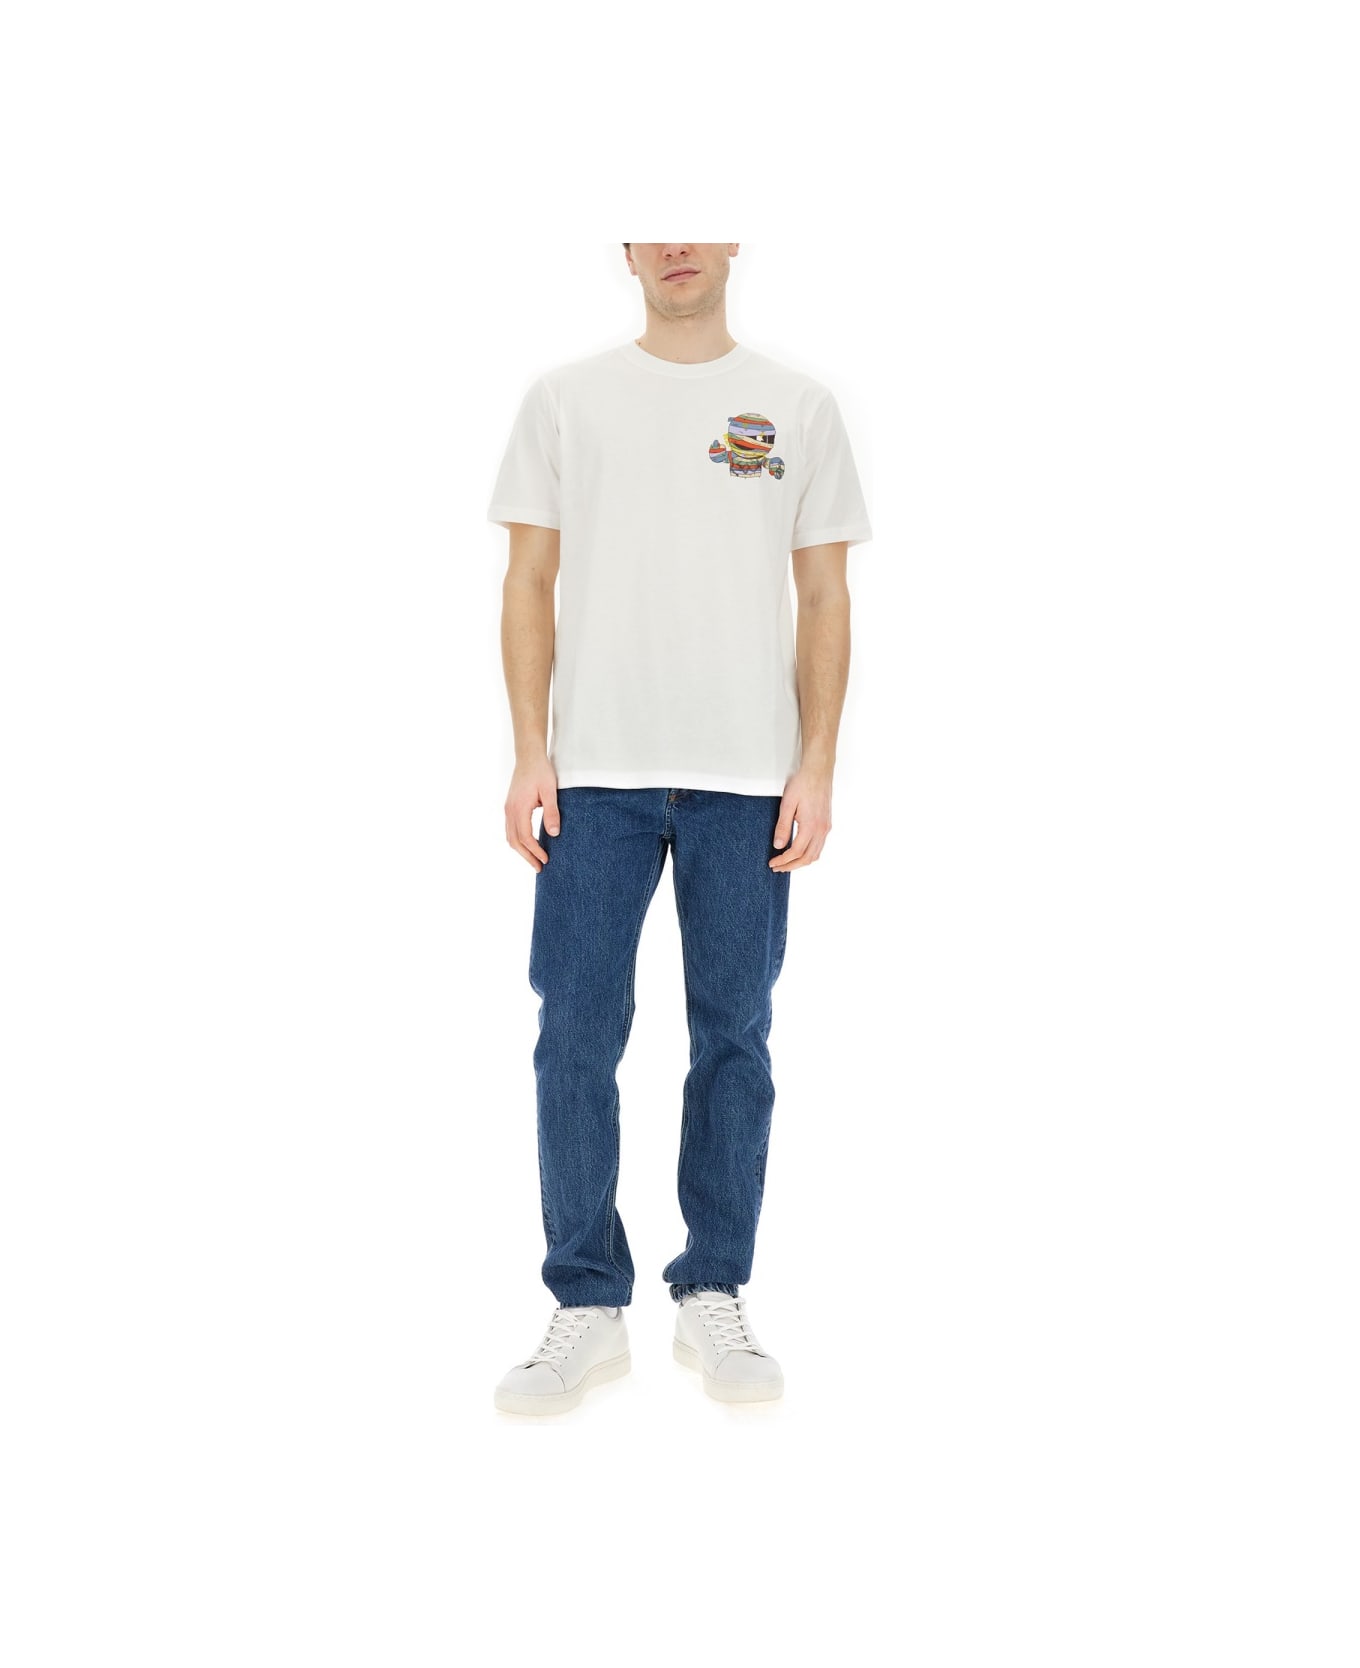 PS by Paul Smith Regular Fit T-shirt - WHITE